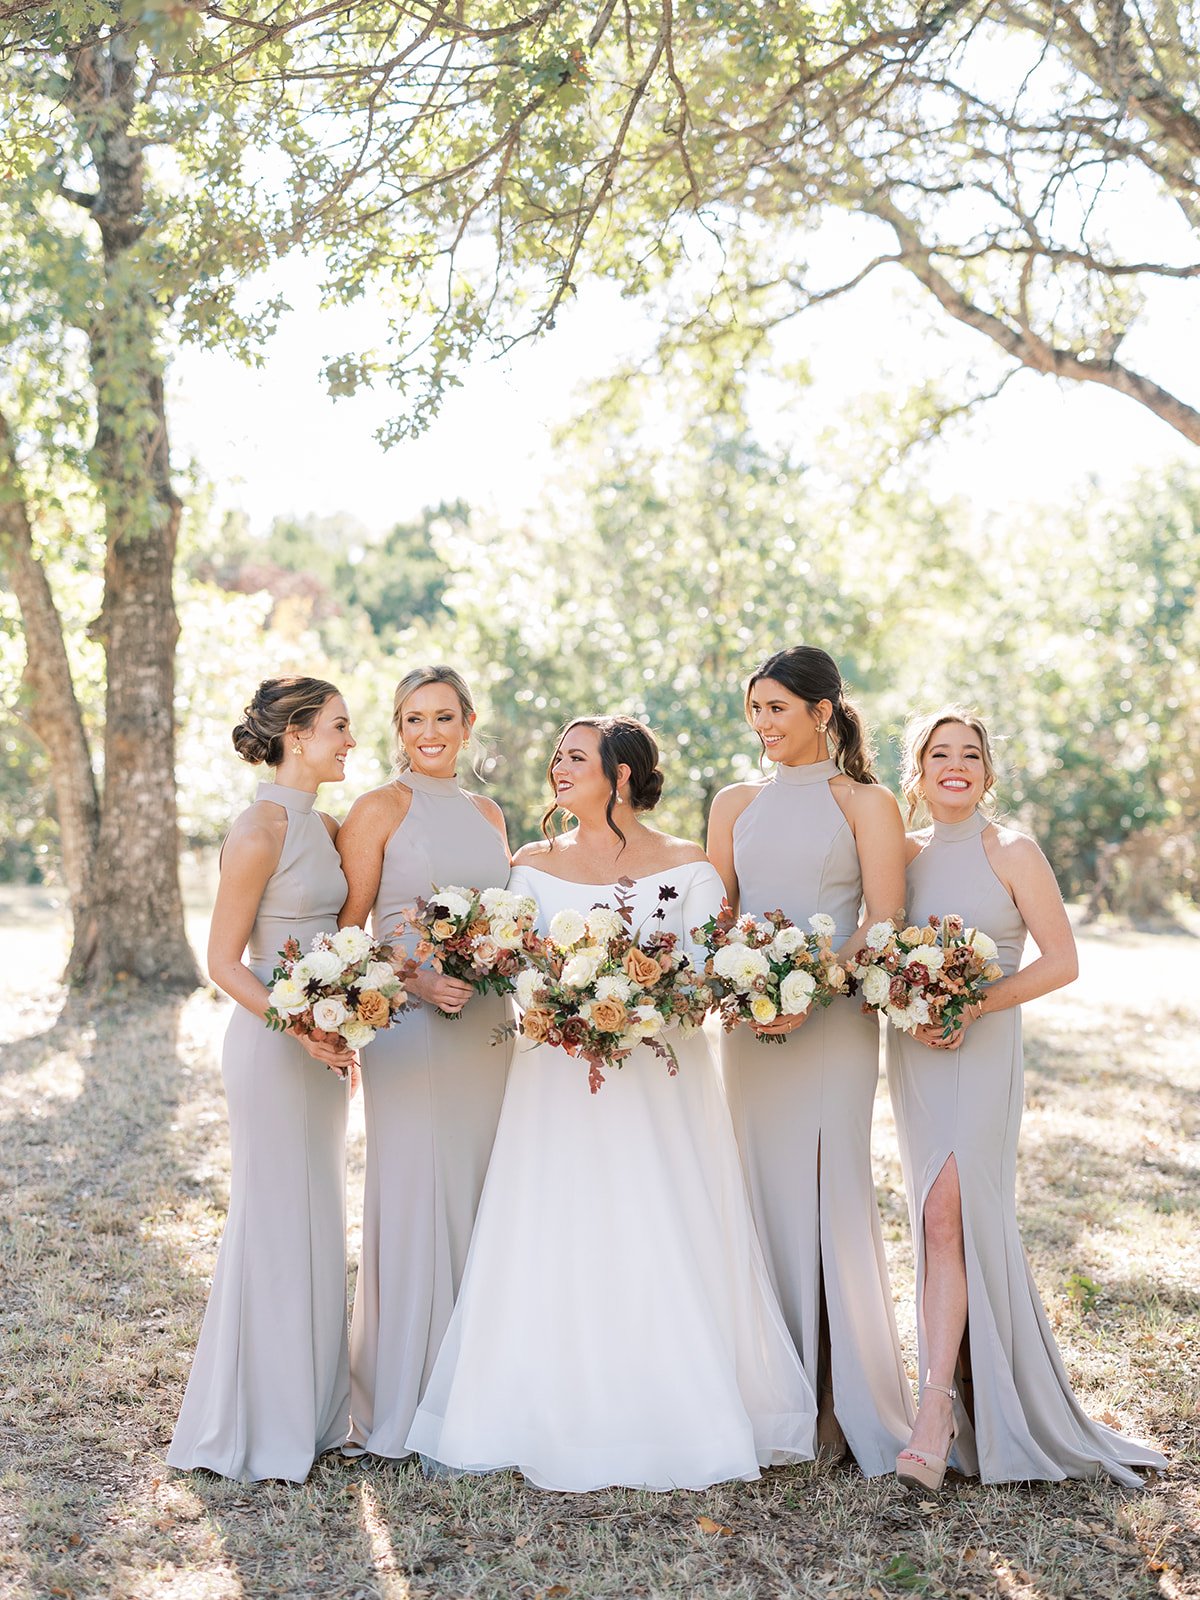 Bridesmaids in long grey dresses with red bouquets at Texas Outdoor Wedding